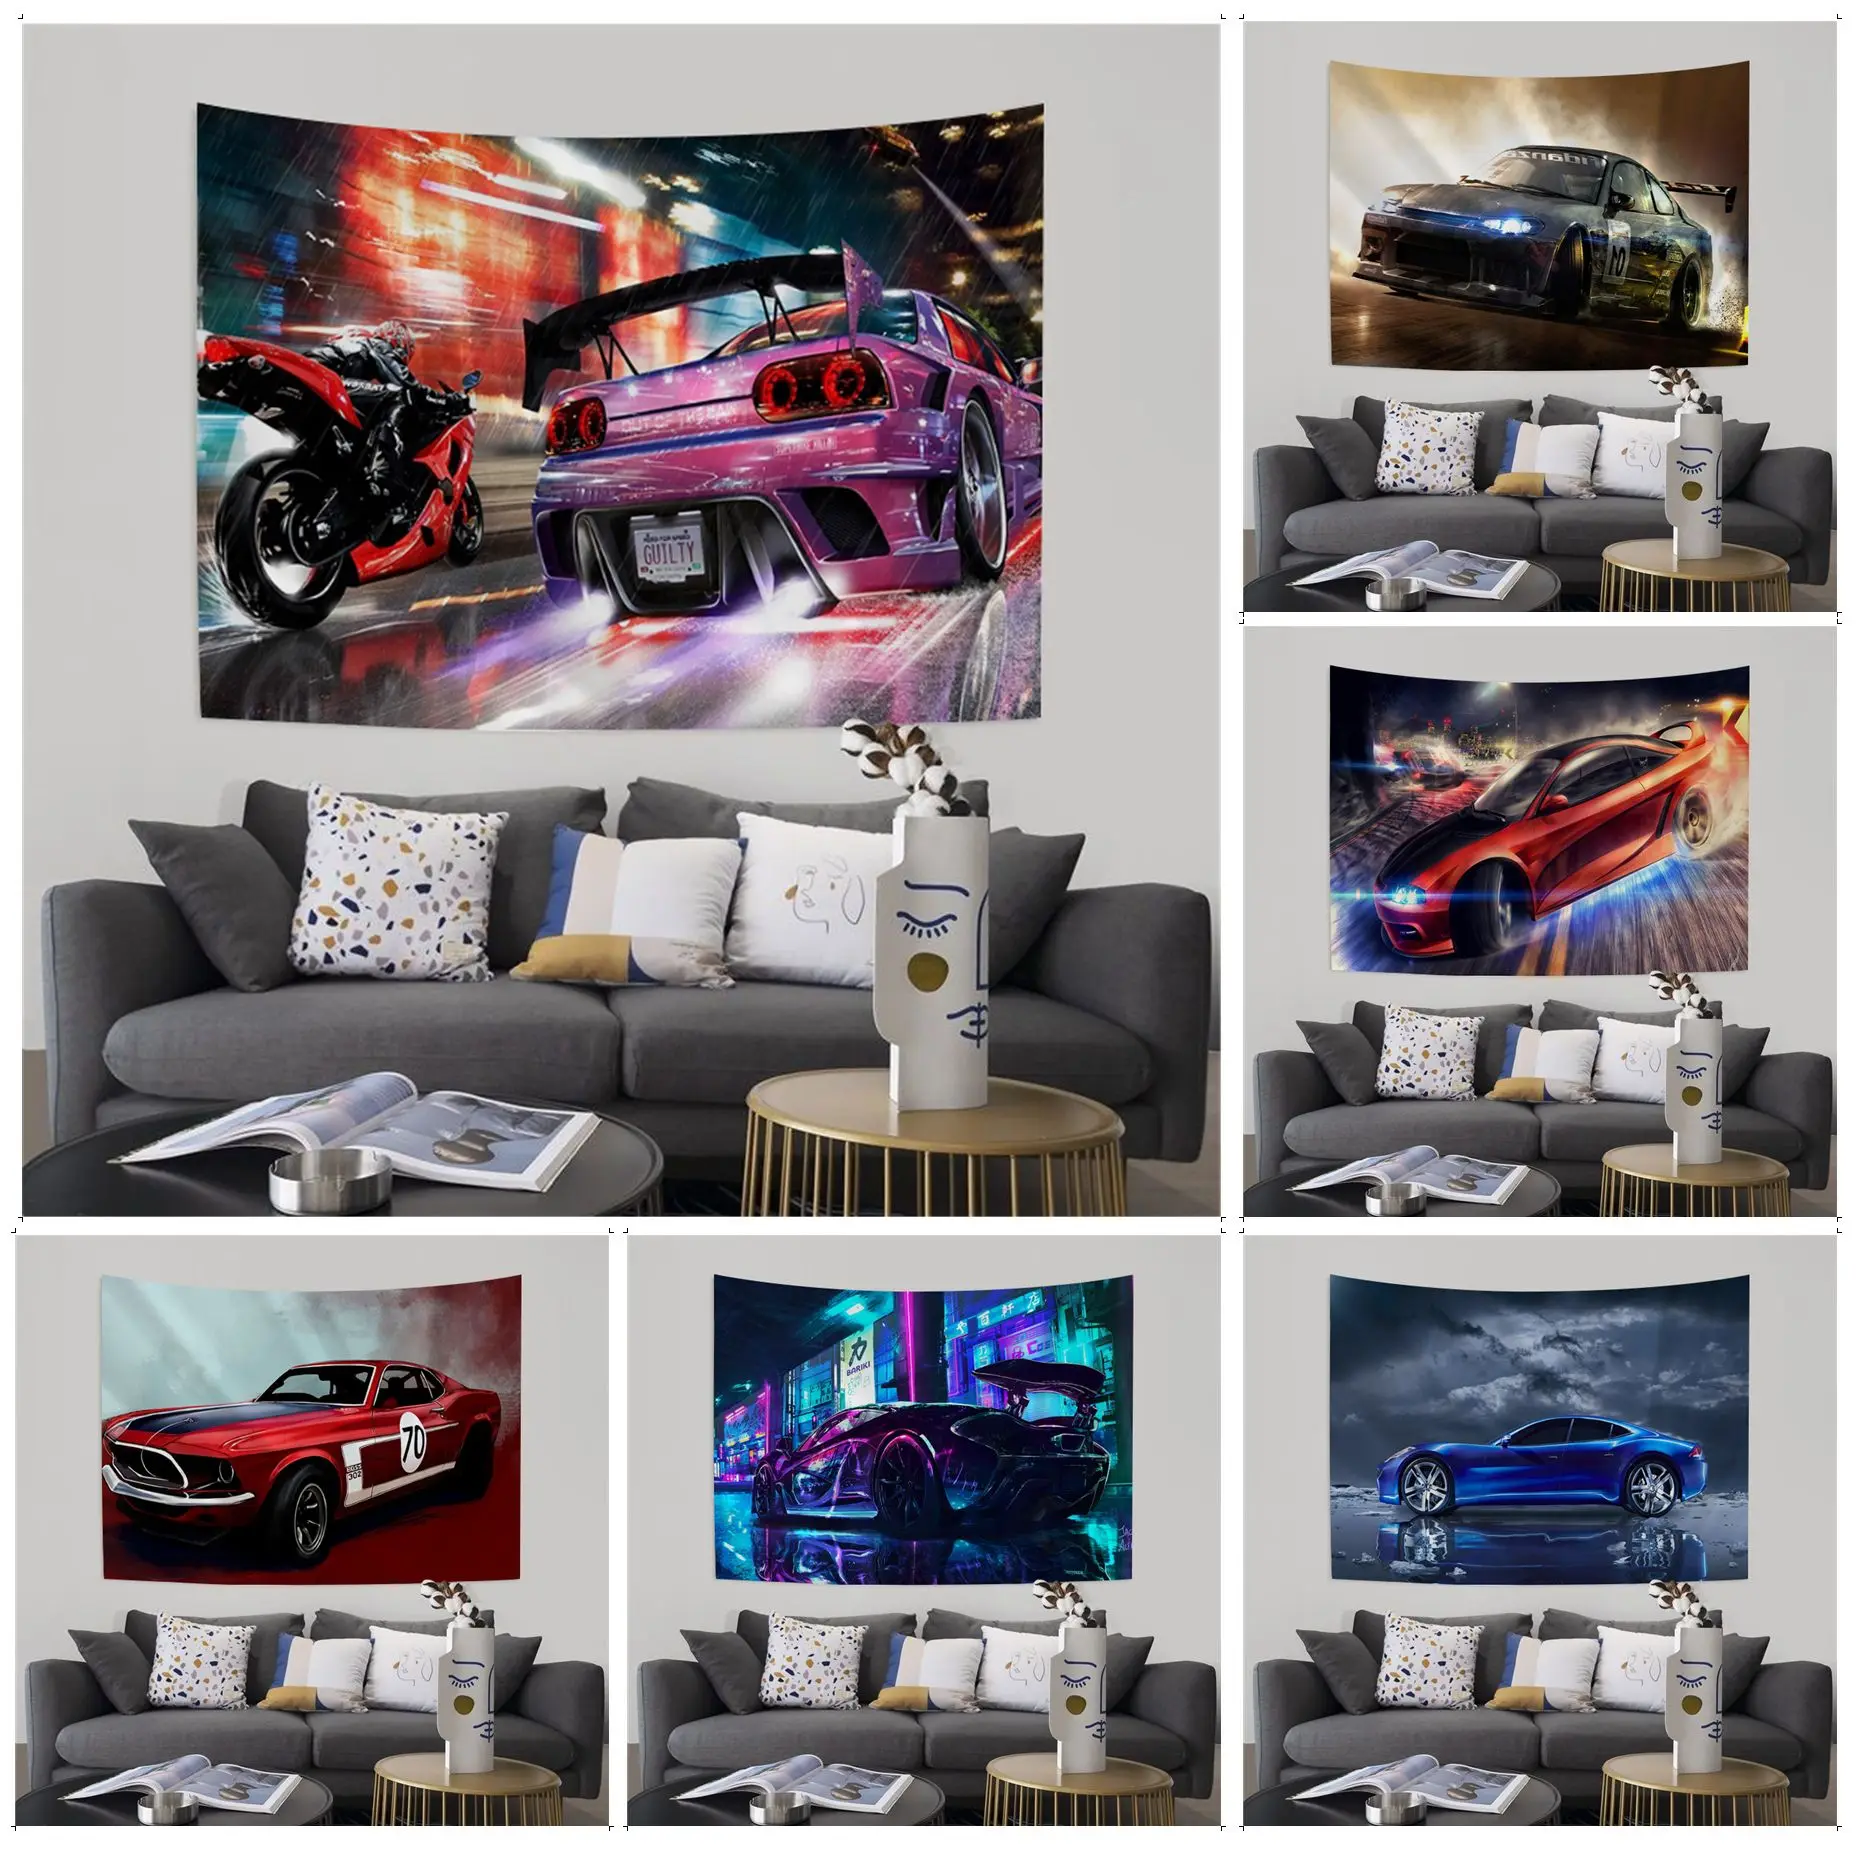 

Sport Car Cartoon Tapestry Indian Buddha Wall Decoration Witchcraft Bohemian Hippie Wall Hanging Sheets